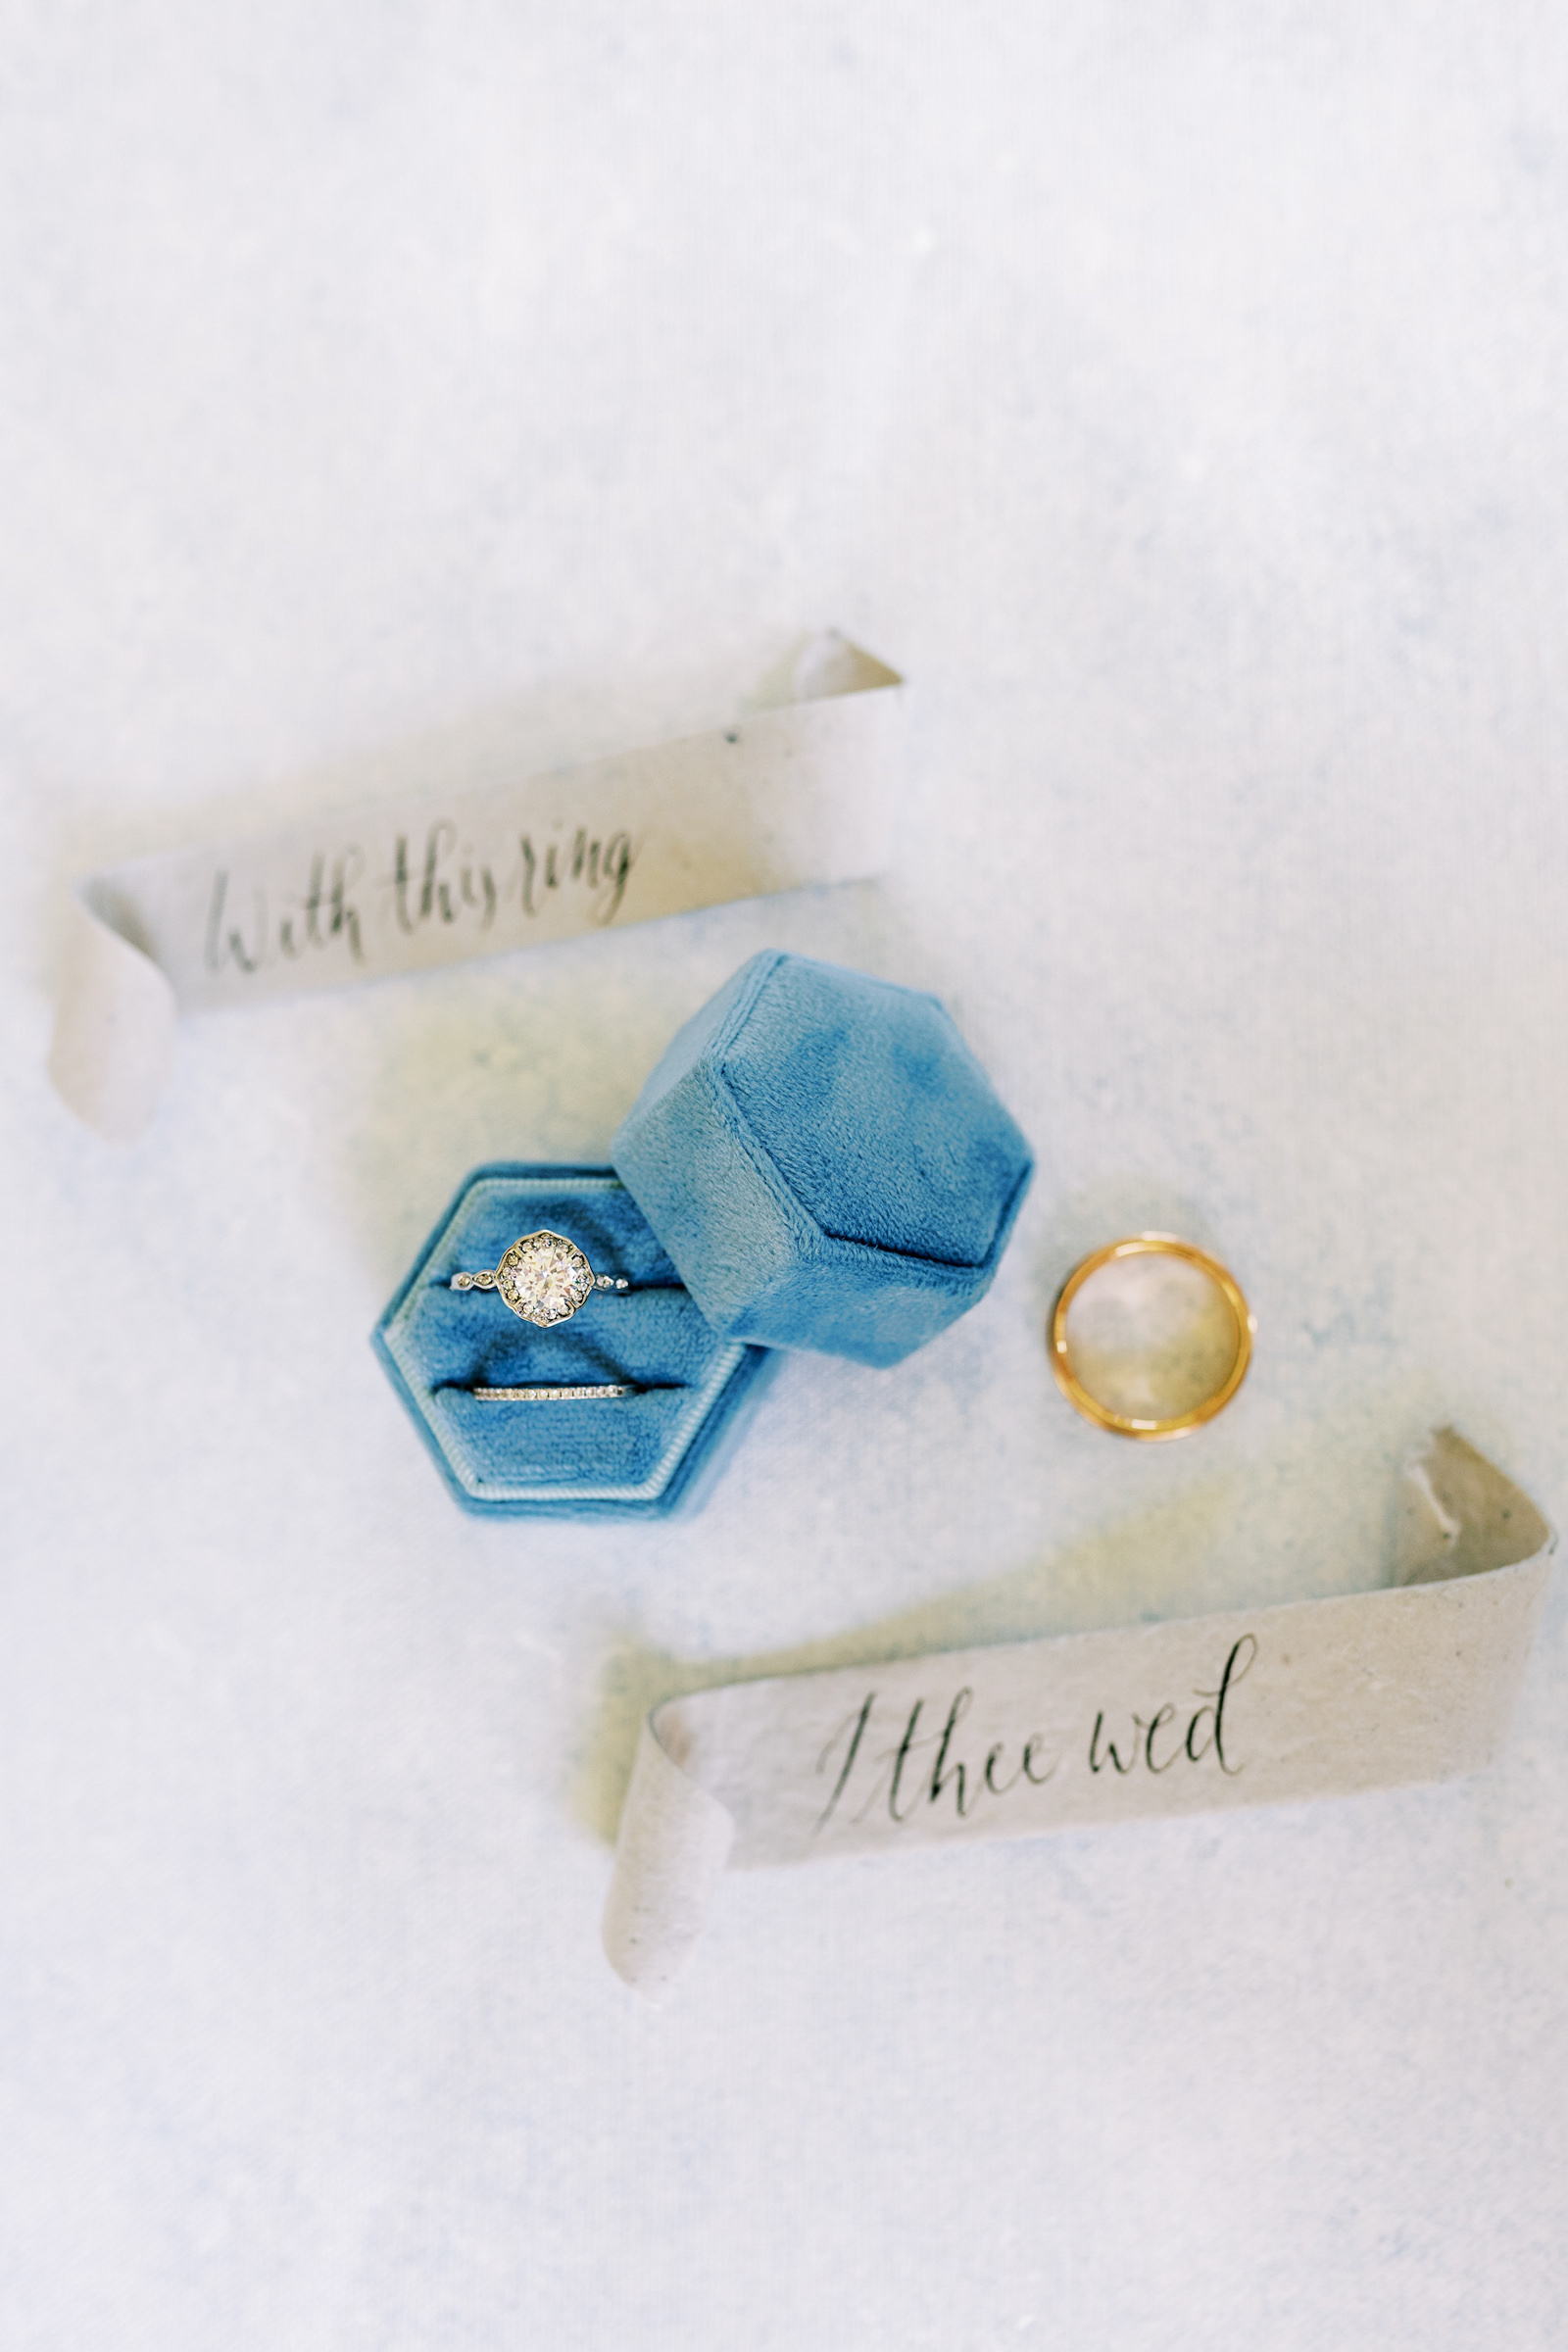 Vintage Inspired Bridal Details, Blue Velvet Ring Box with Round Diamond Engagement Ring, Details "With This Ring I Thee Wed" | Central Florida Luxury Wedding Planner EventFull Weddings